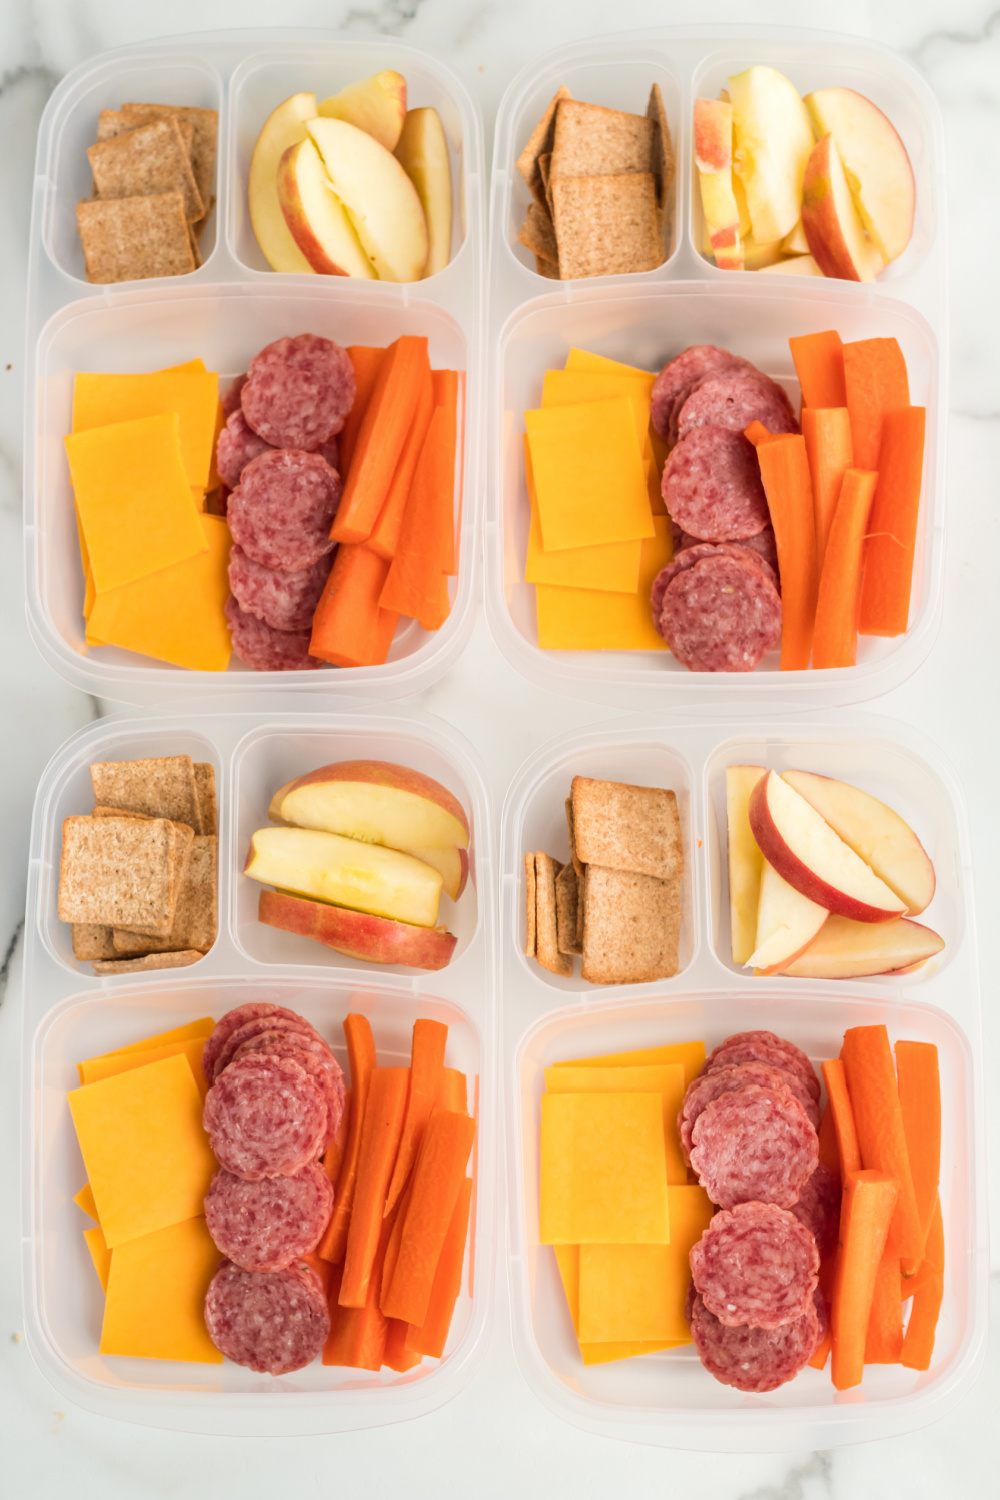 This salami, cheese and crackers lunch box idea is packed with crackers, cheese and salami to give you a boost of protein to keep you full all day. via @familyfresh